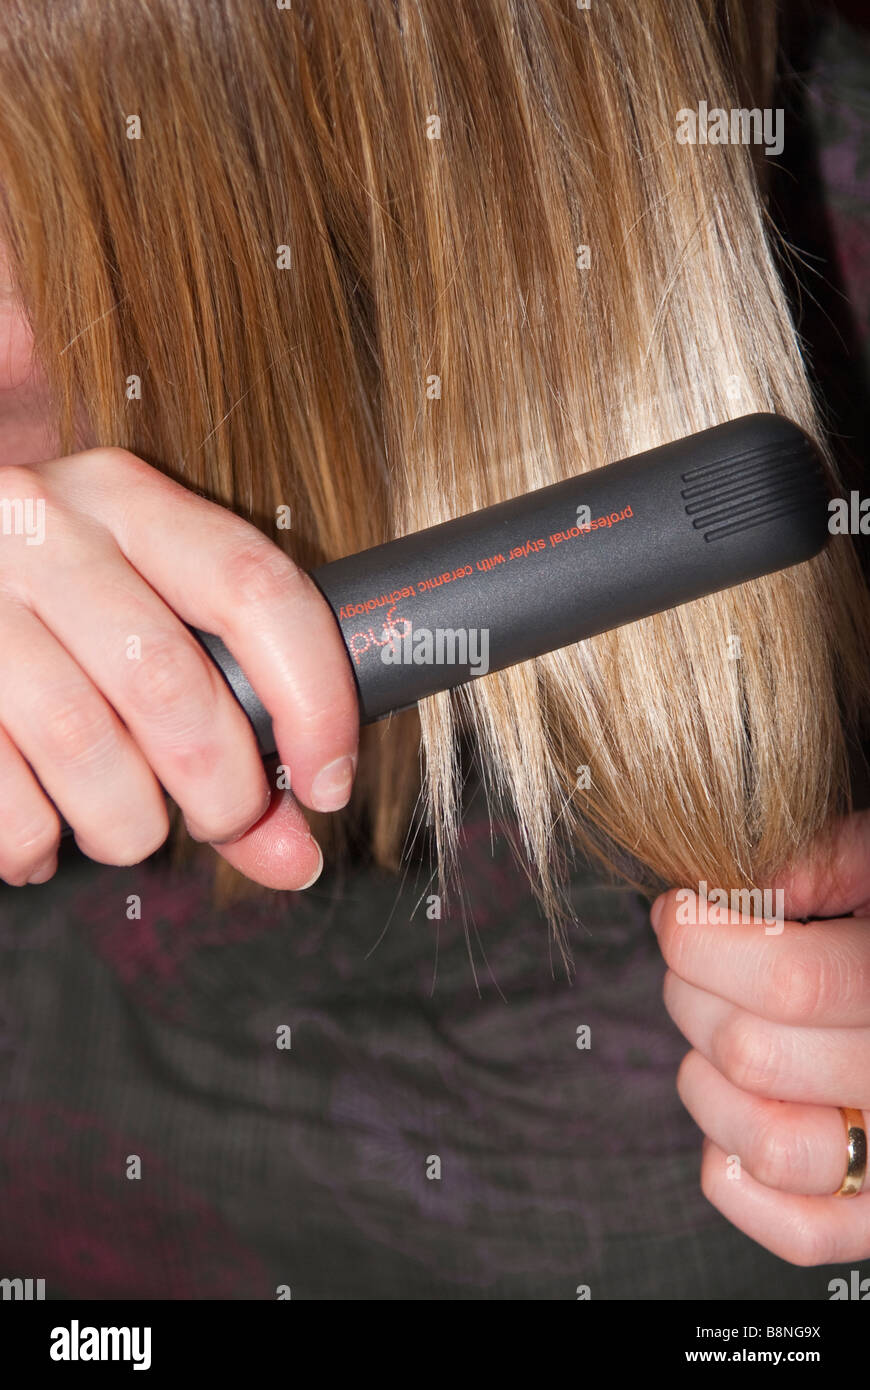 A close up of a woman straightening her hair using Ghd professional straightening irons Stock Photo